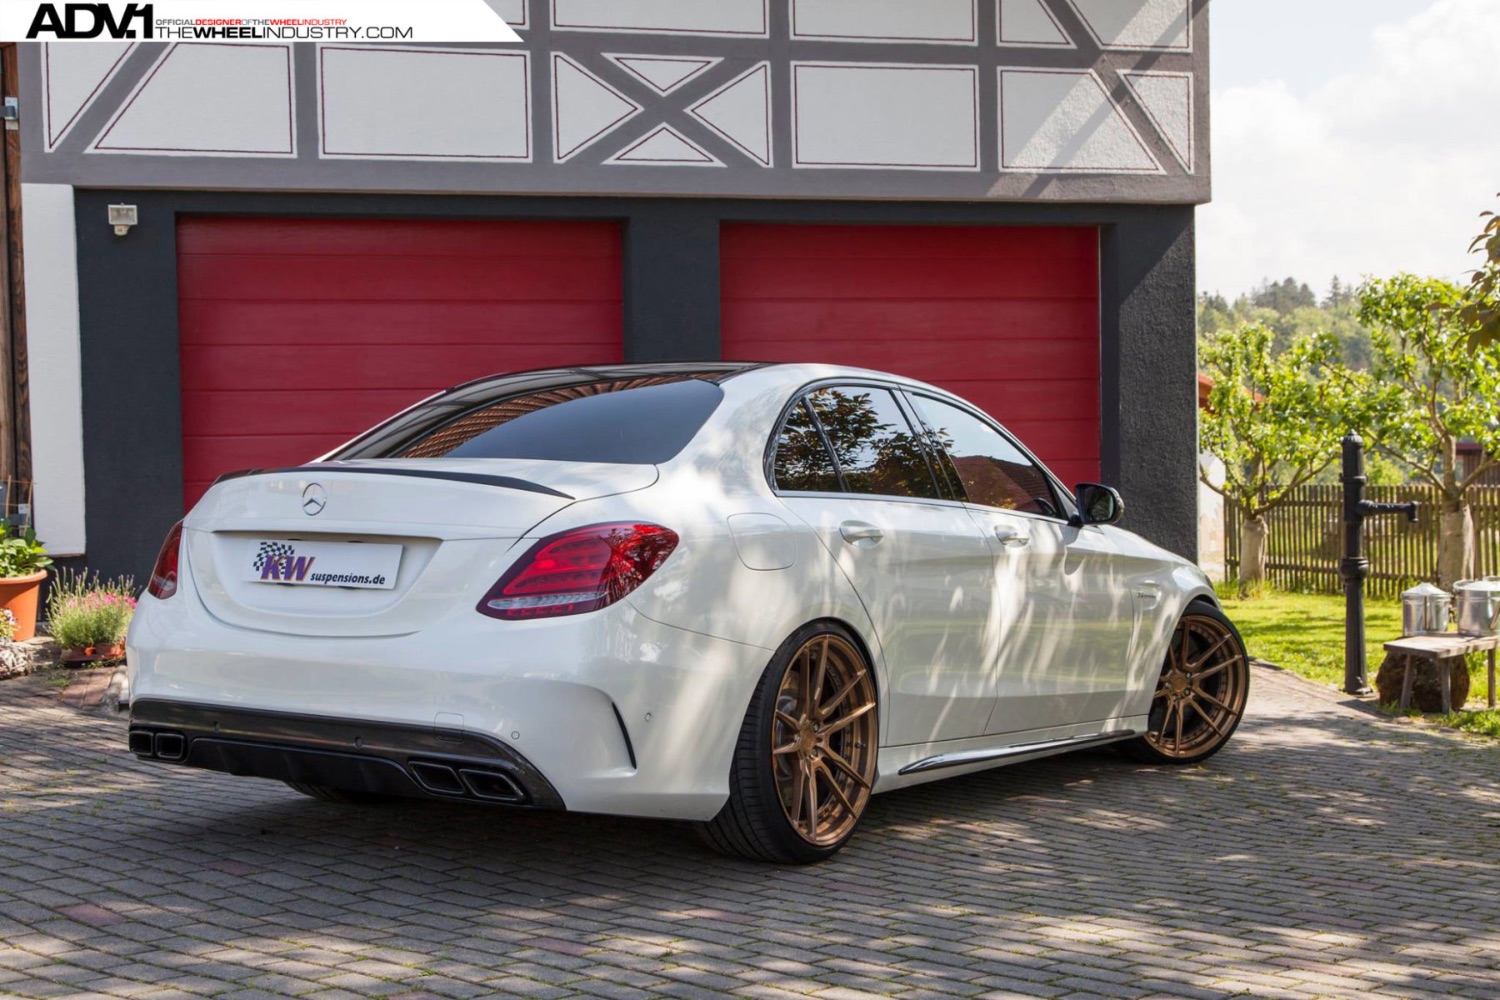 adv1-mercedes-amg-c63s-coilover-lowered-wheels-a